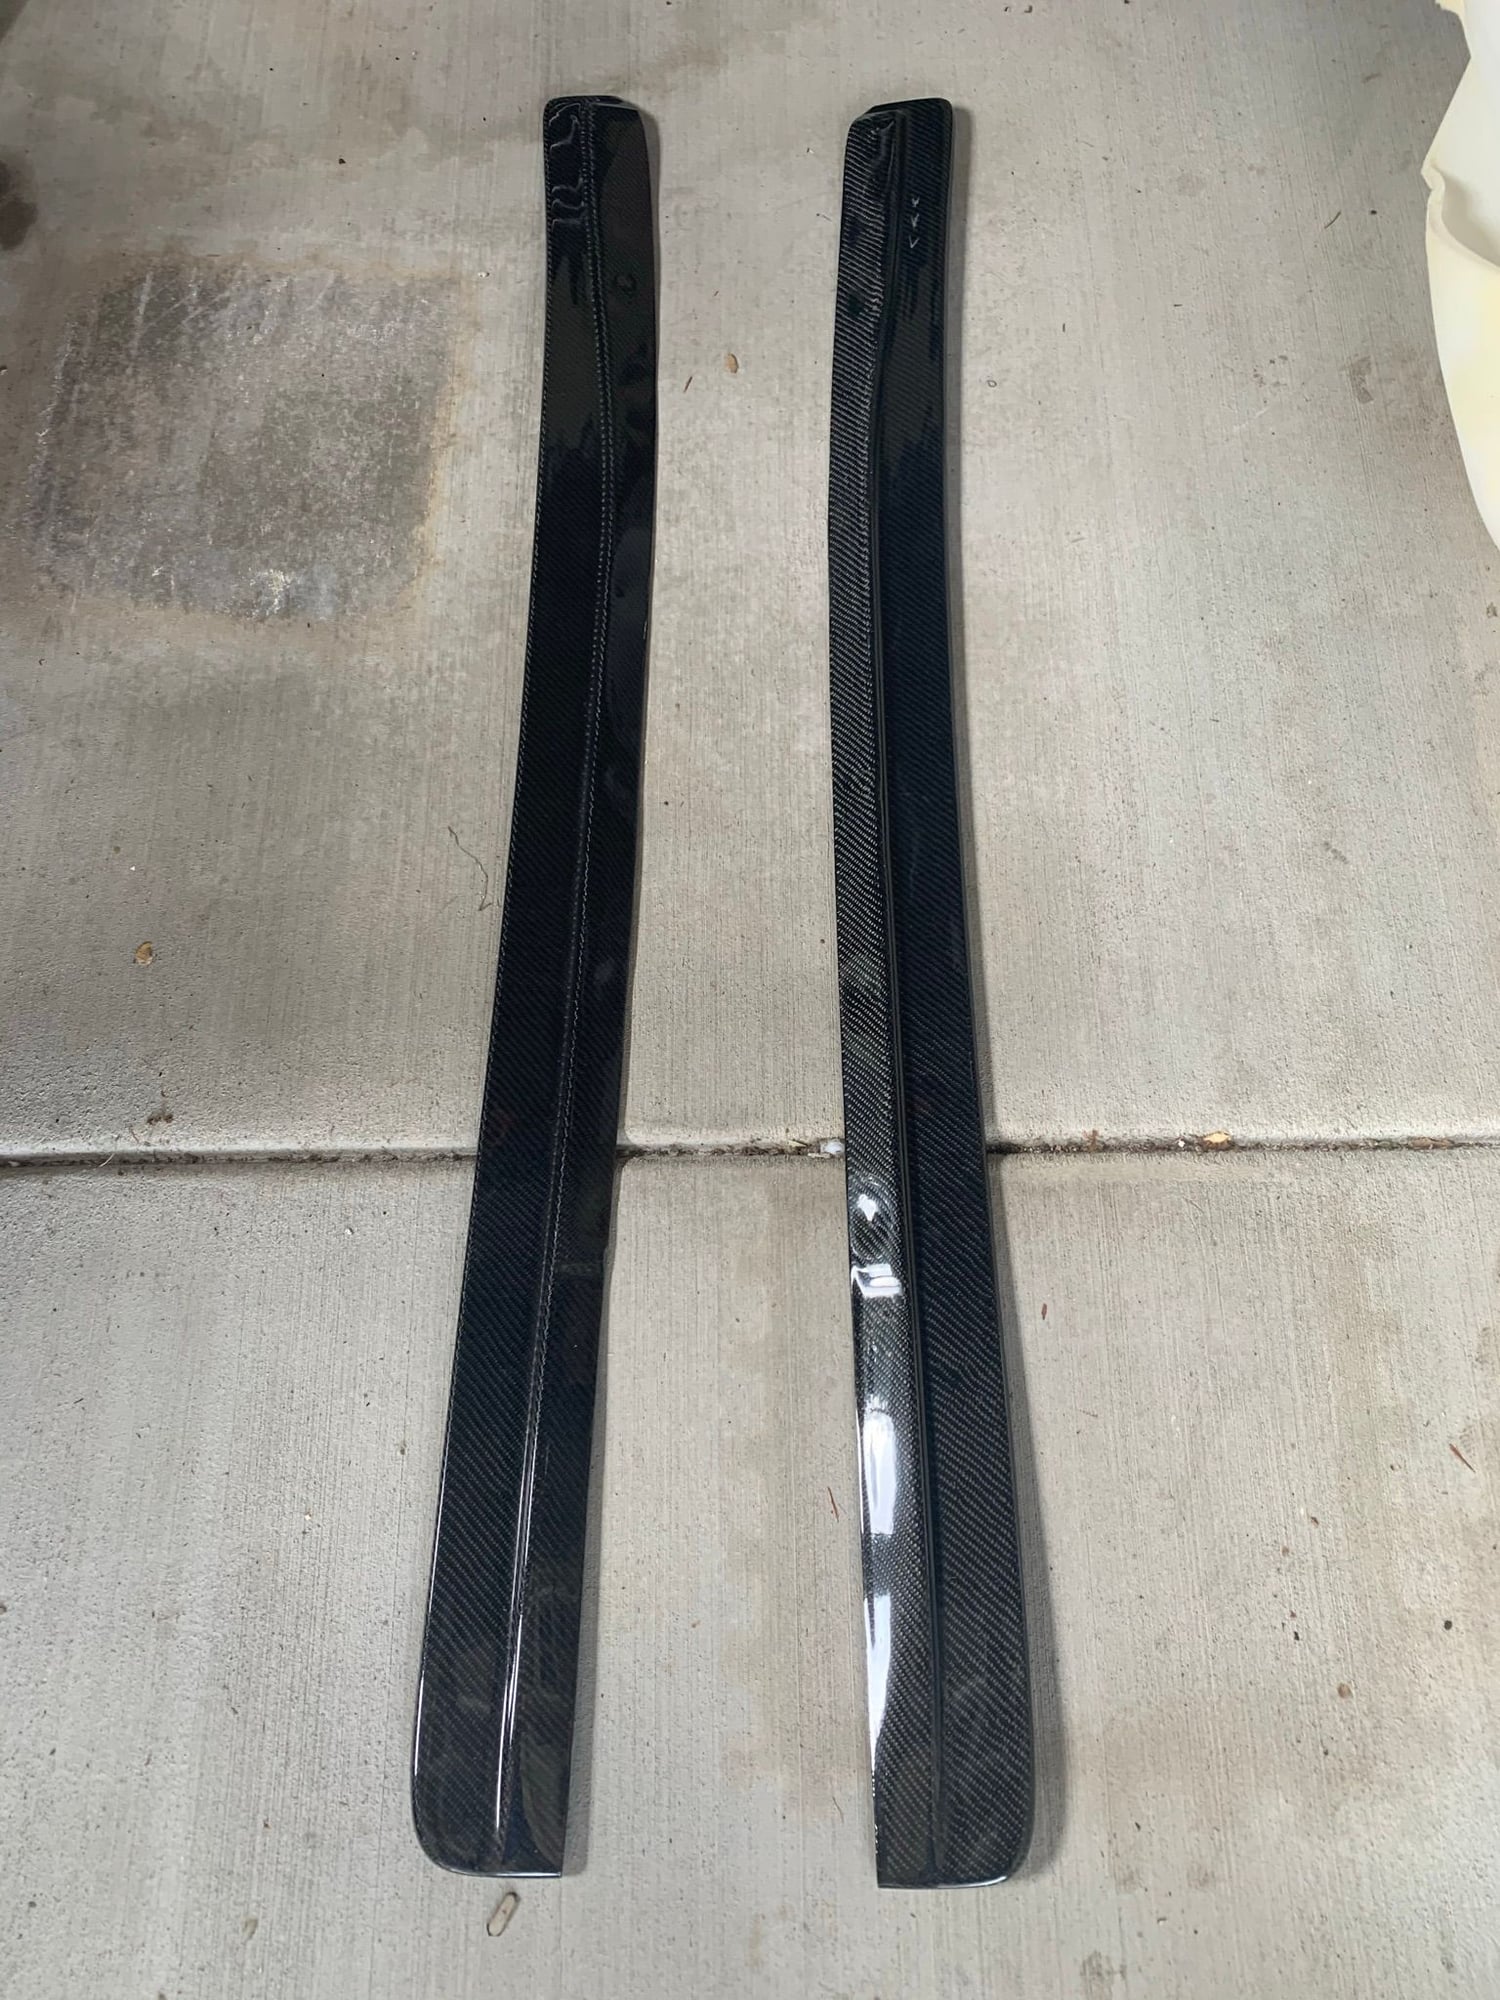 1993 Mazda RX-7 - Feed Style Side Skirts - Carbon - Exterior Body Parts - $250 - Pasadena, CA 91106, United States